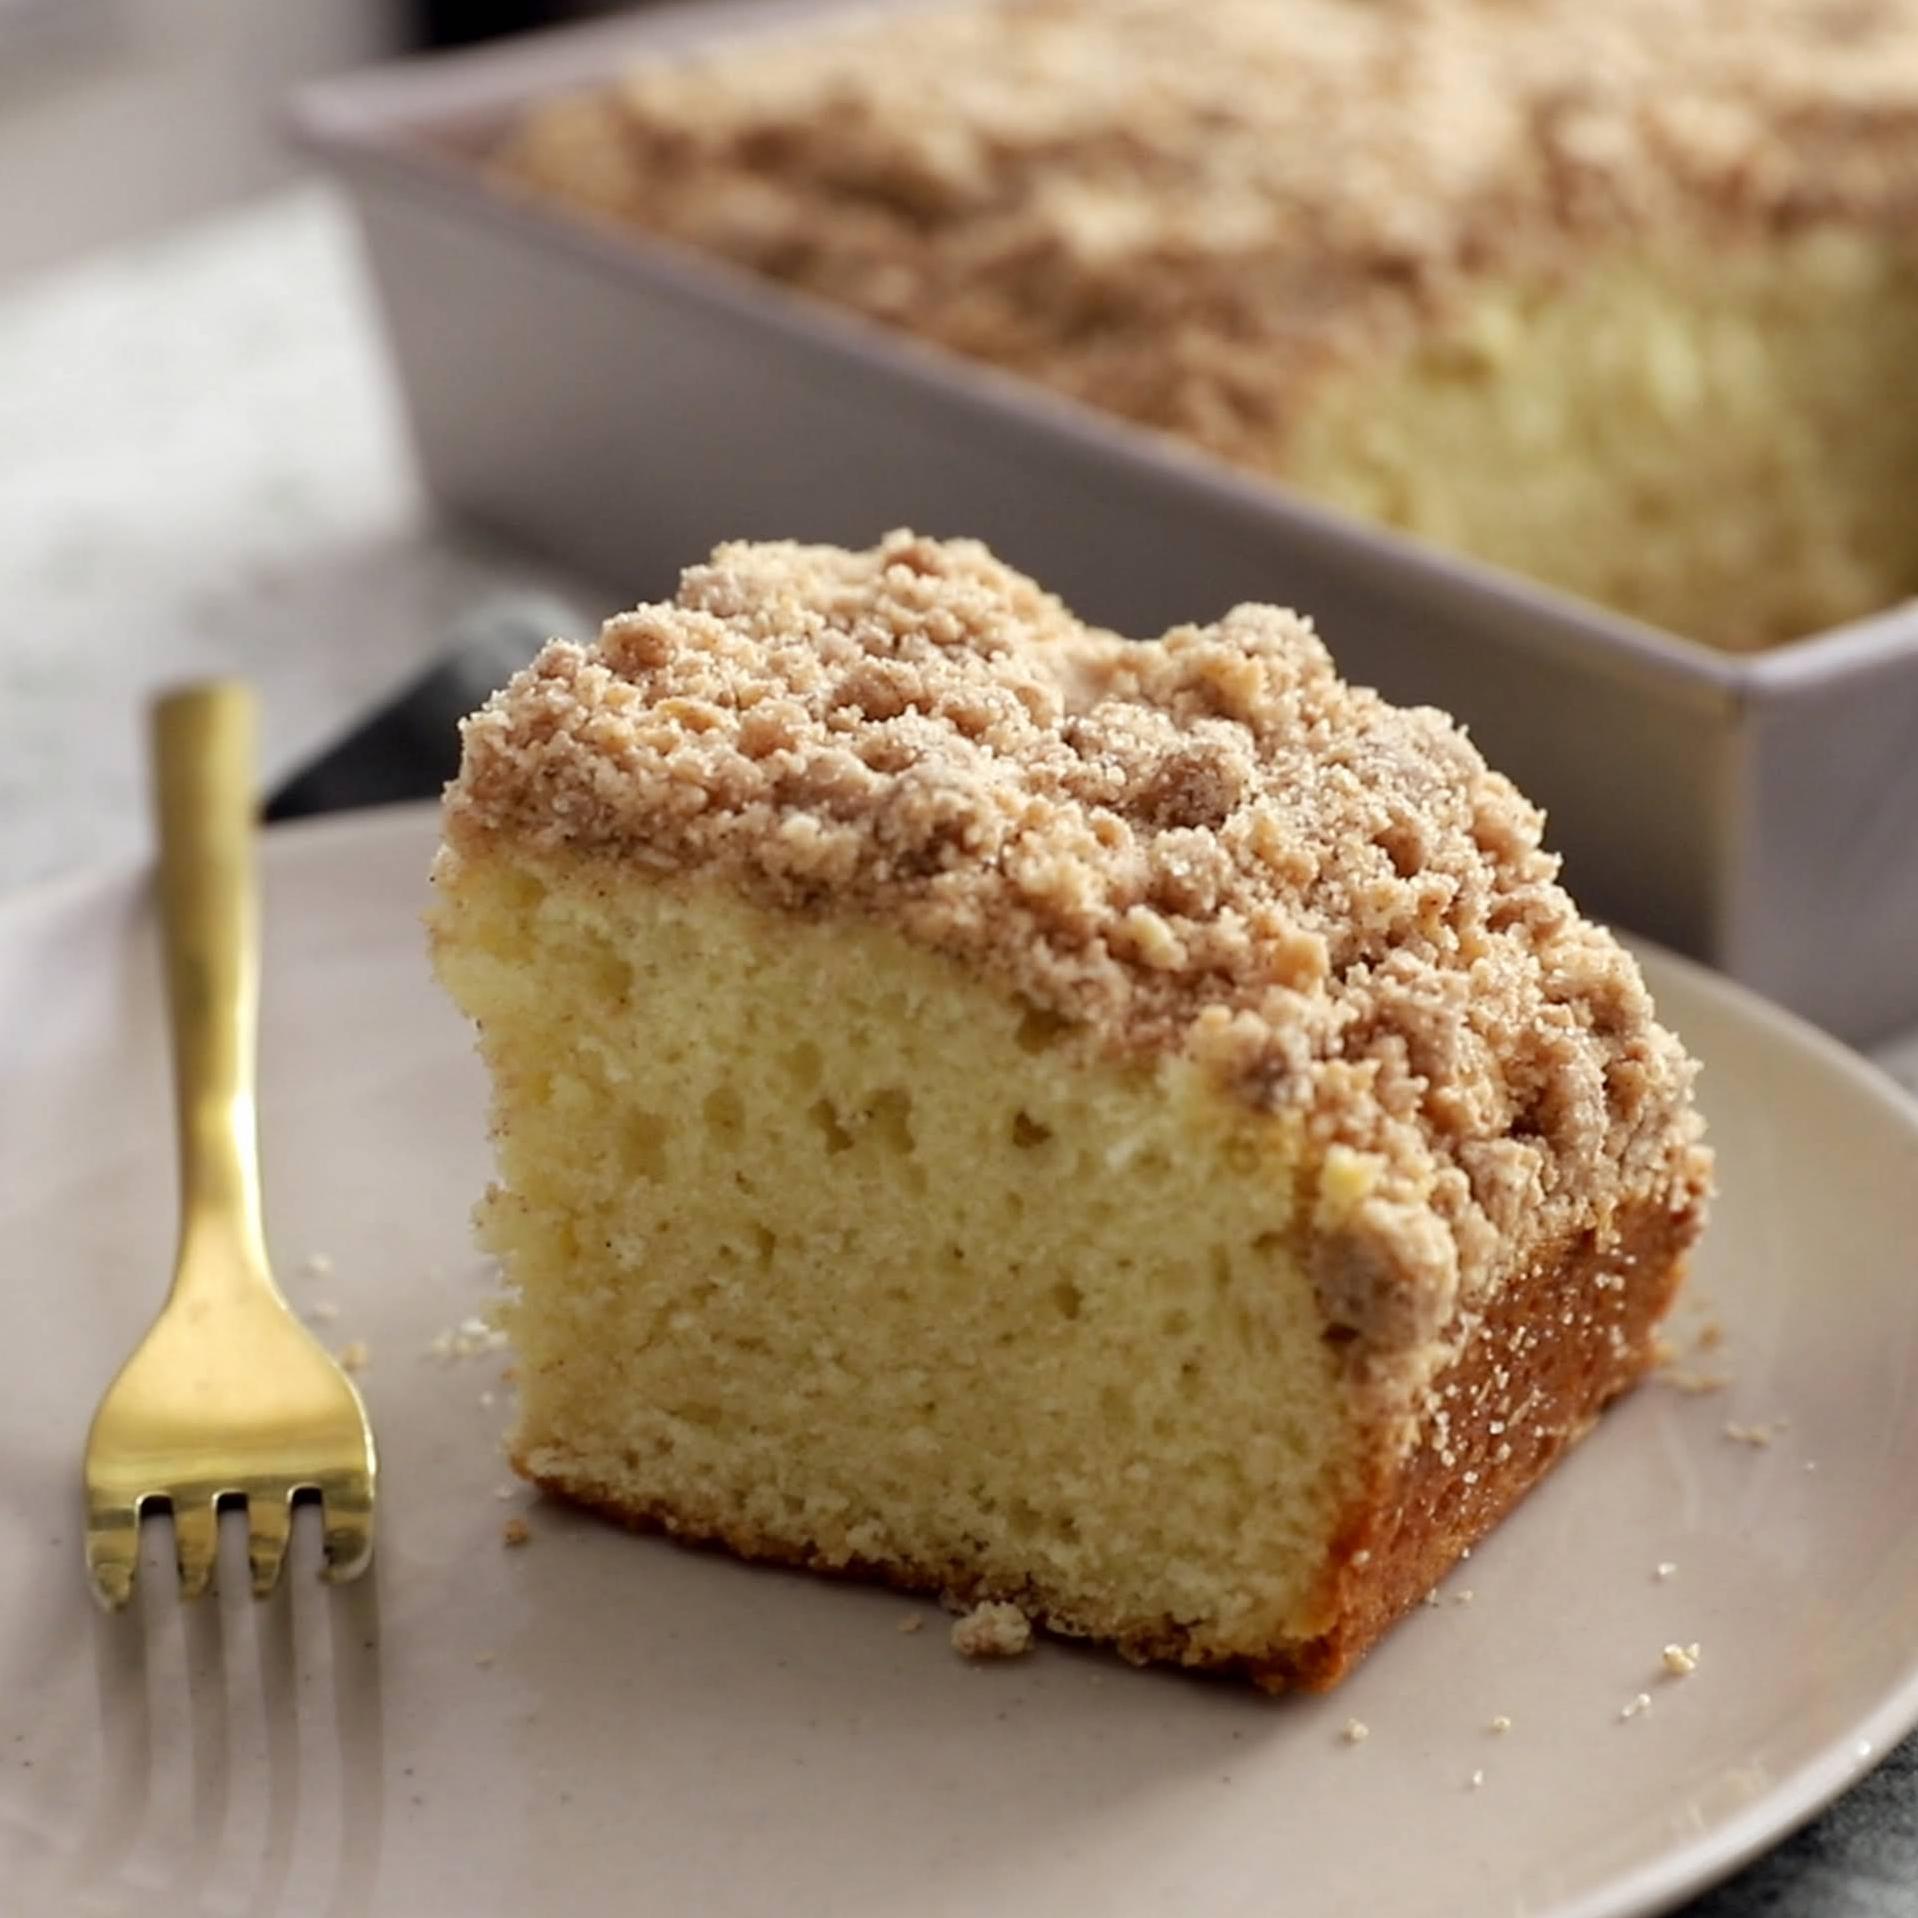 Sure, here are 11 creative photo captions for the Sugar Free Coffee Cake recipe: